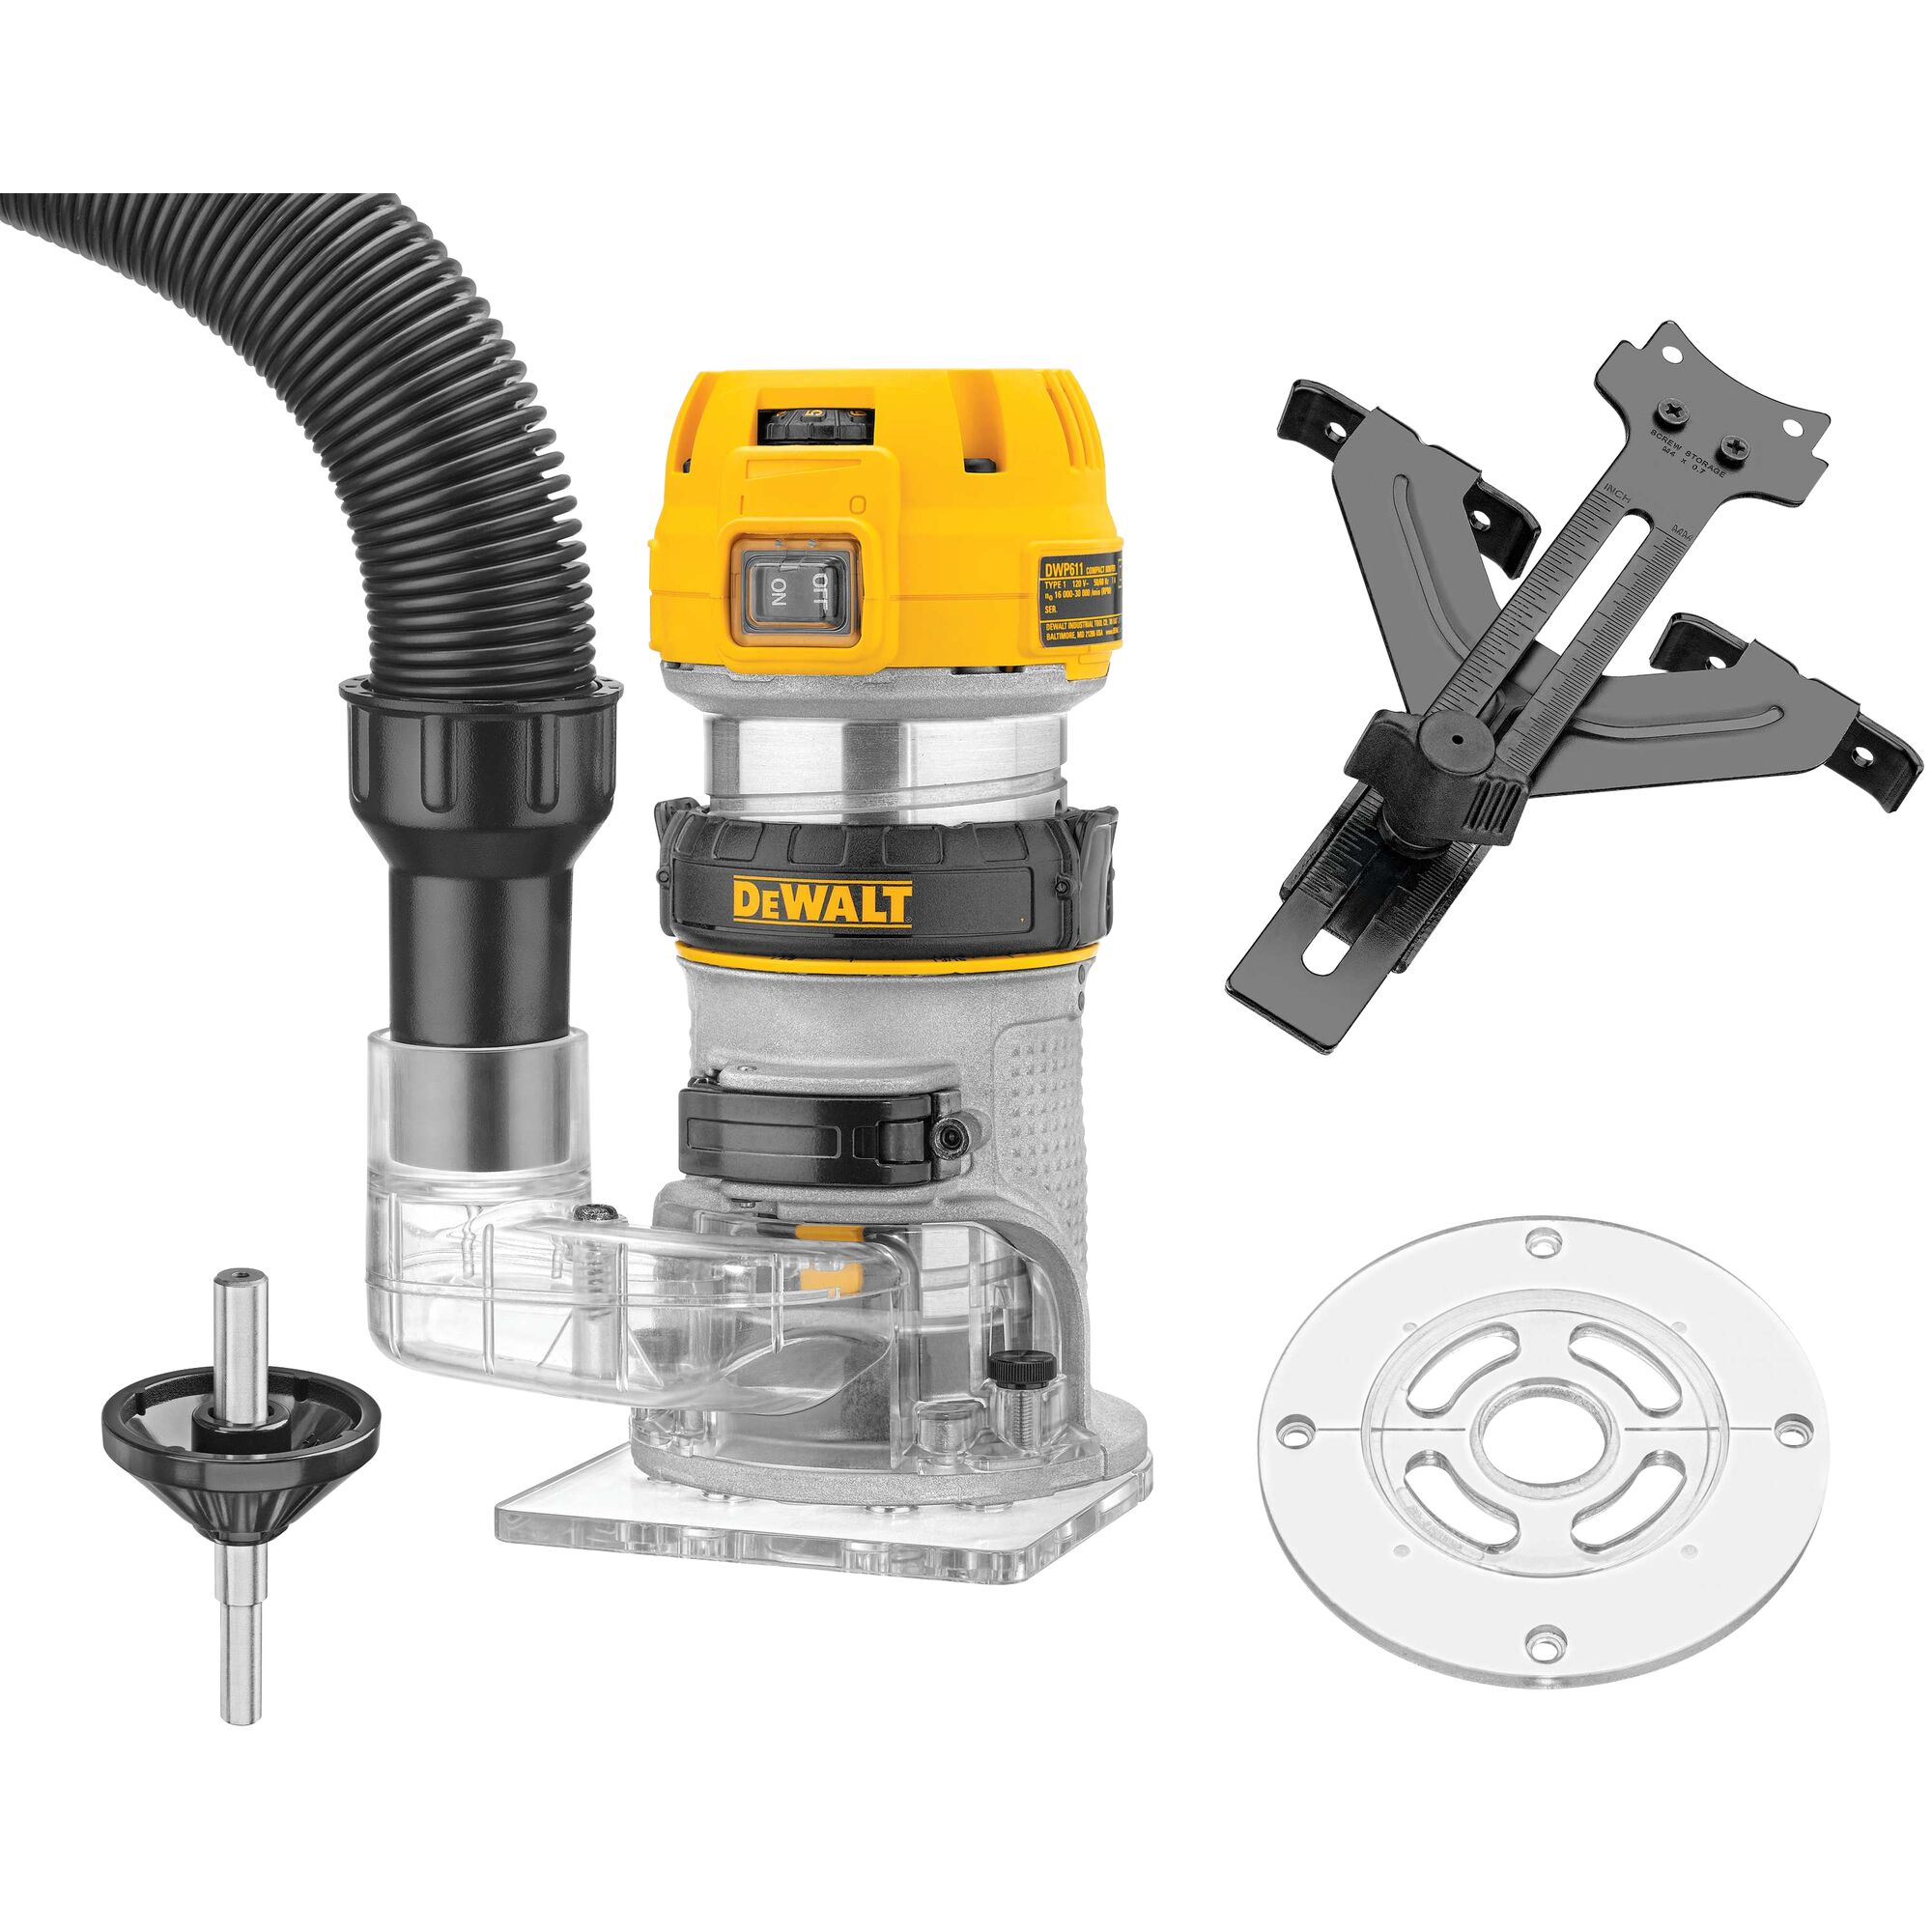 1-1/4 HP Max Torque Variable Speed Compact Router | DEWALT